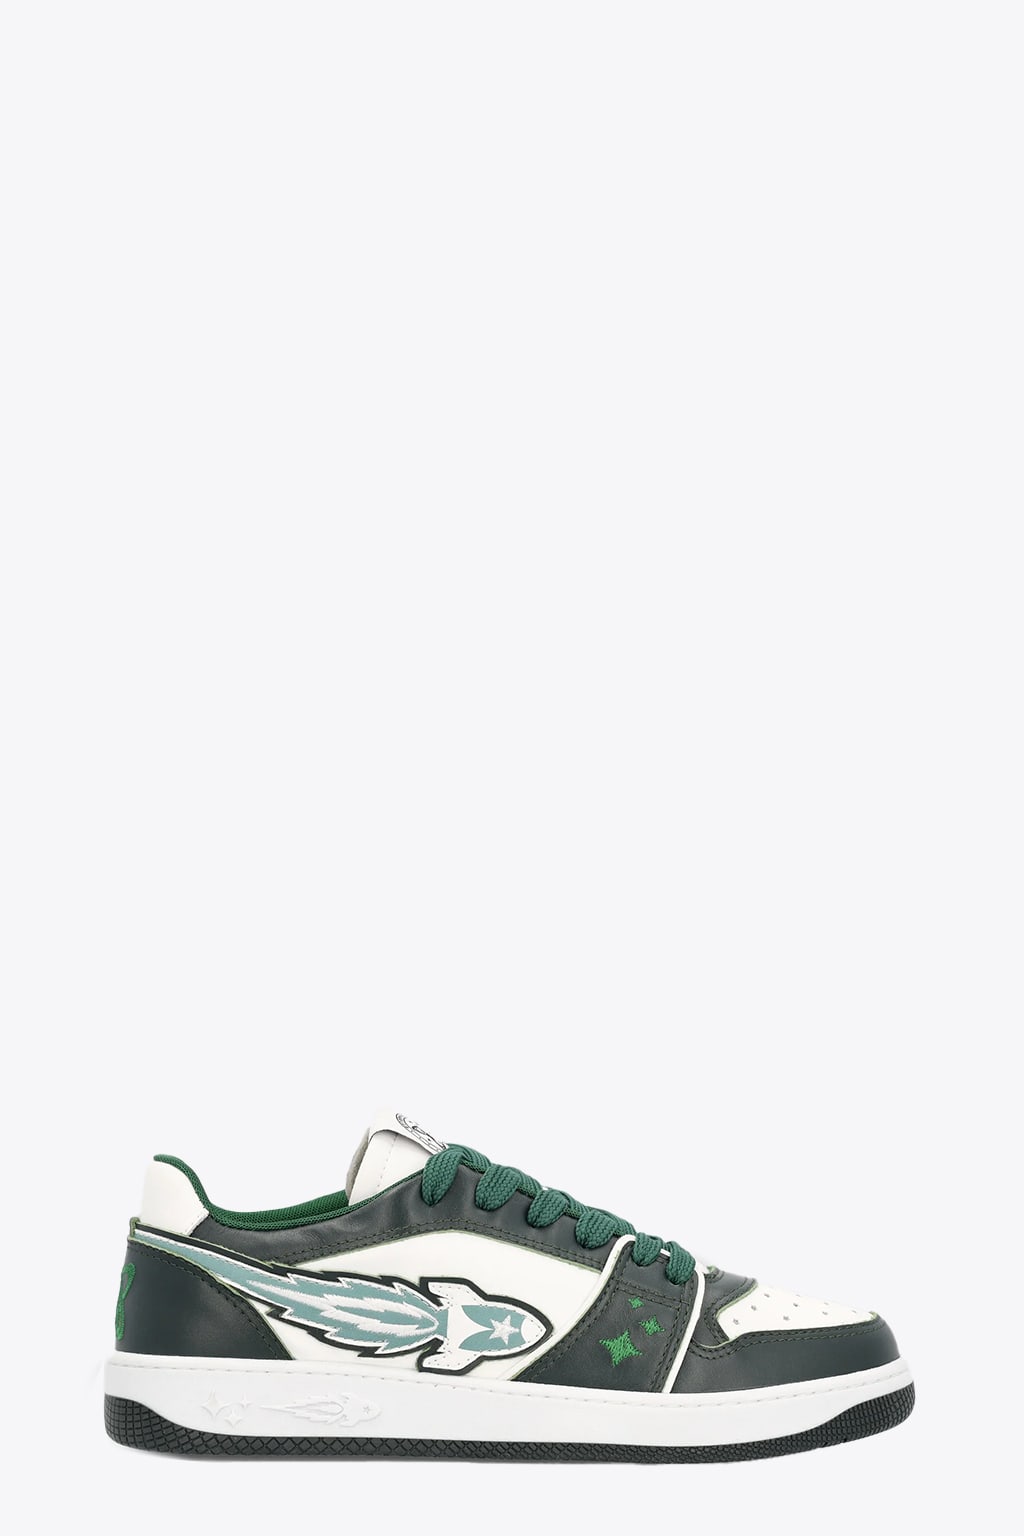 Enterprise Japan Rocket Low White and green leather low sneakers with side rocket detail